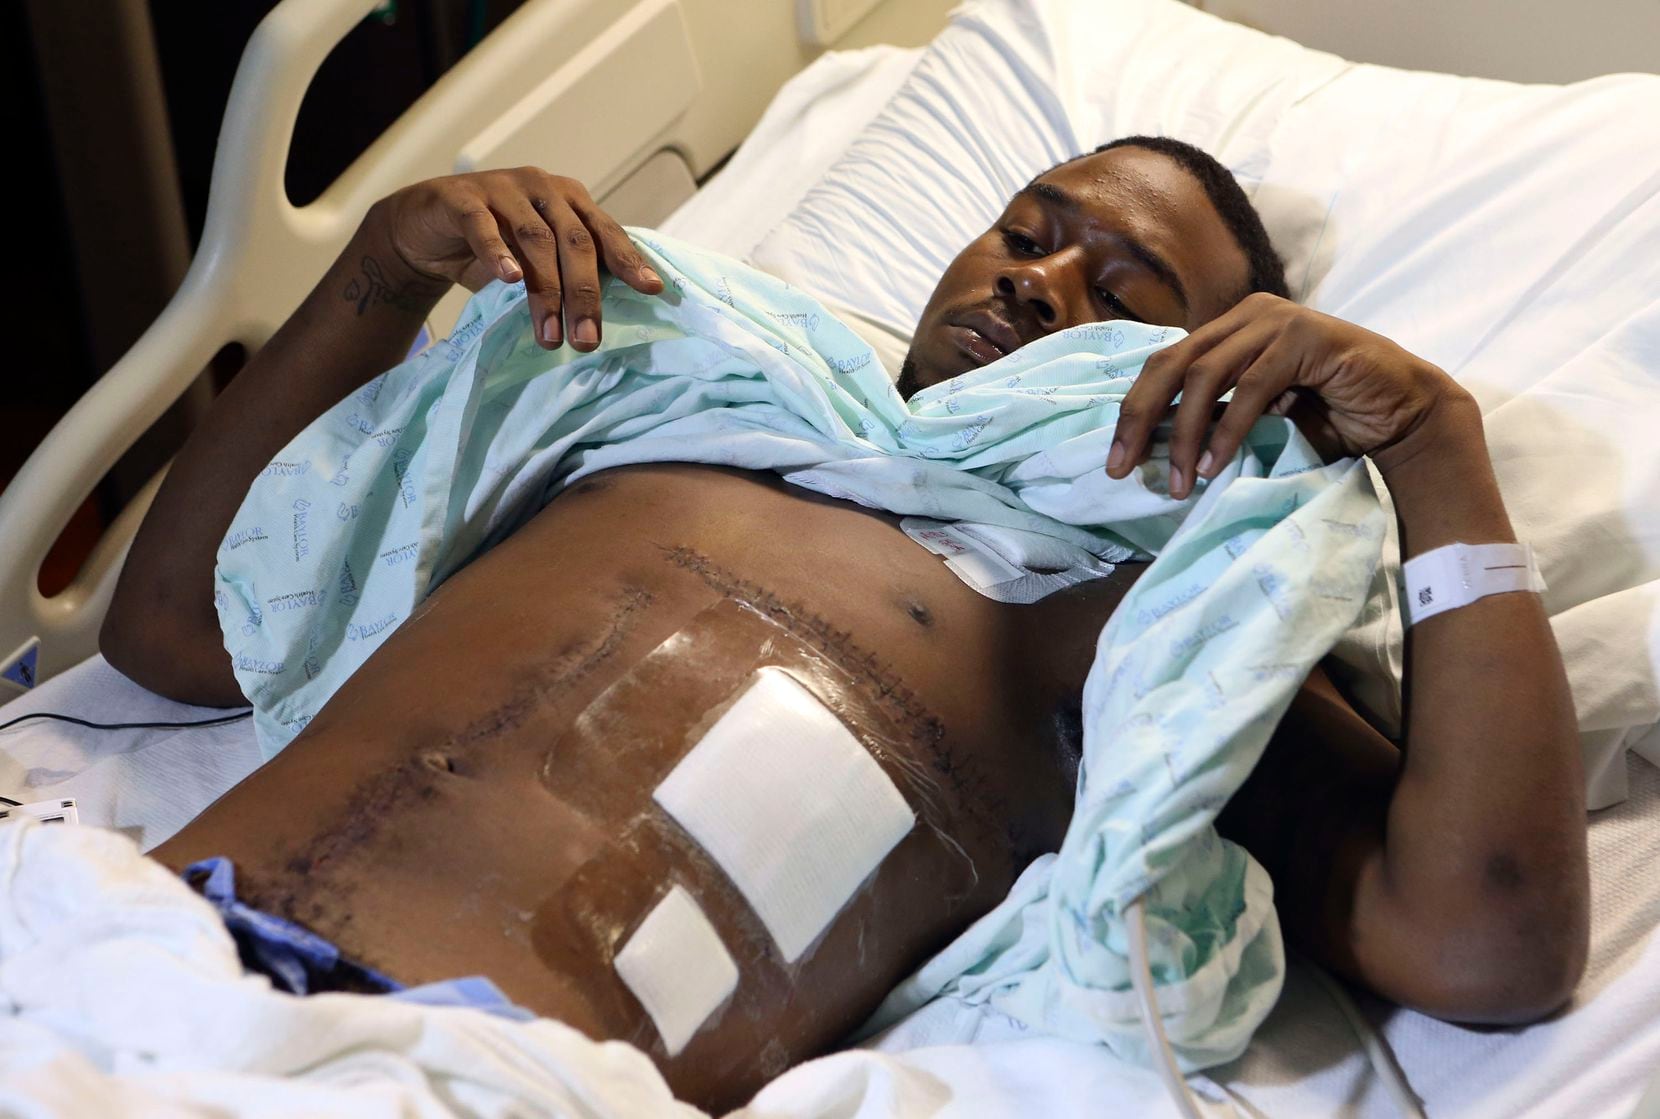 Kelvion Walker, 19,  shows his wounds from the surgery that saved his life after he was shot by Senior Cpl. Amy Wilburn in December 2013. An independent witness said the officer shot Walker even though he had both hands in the air and showed no signs of having a weapon. 